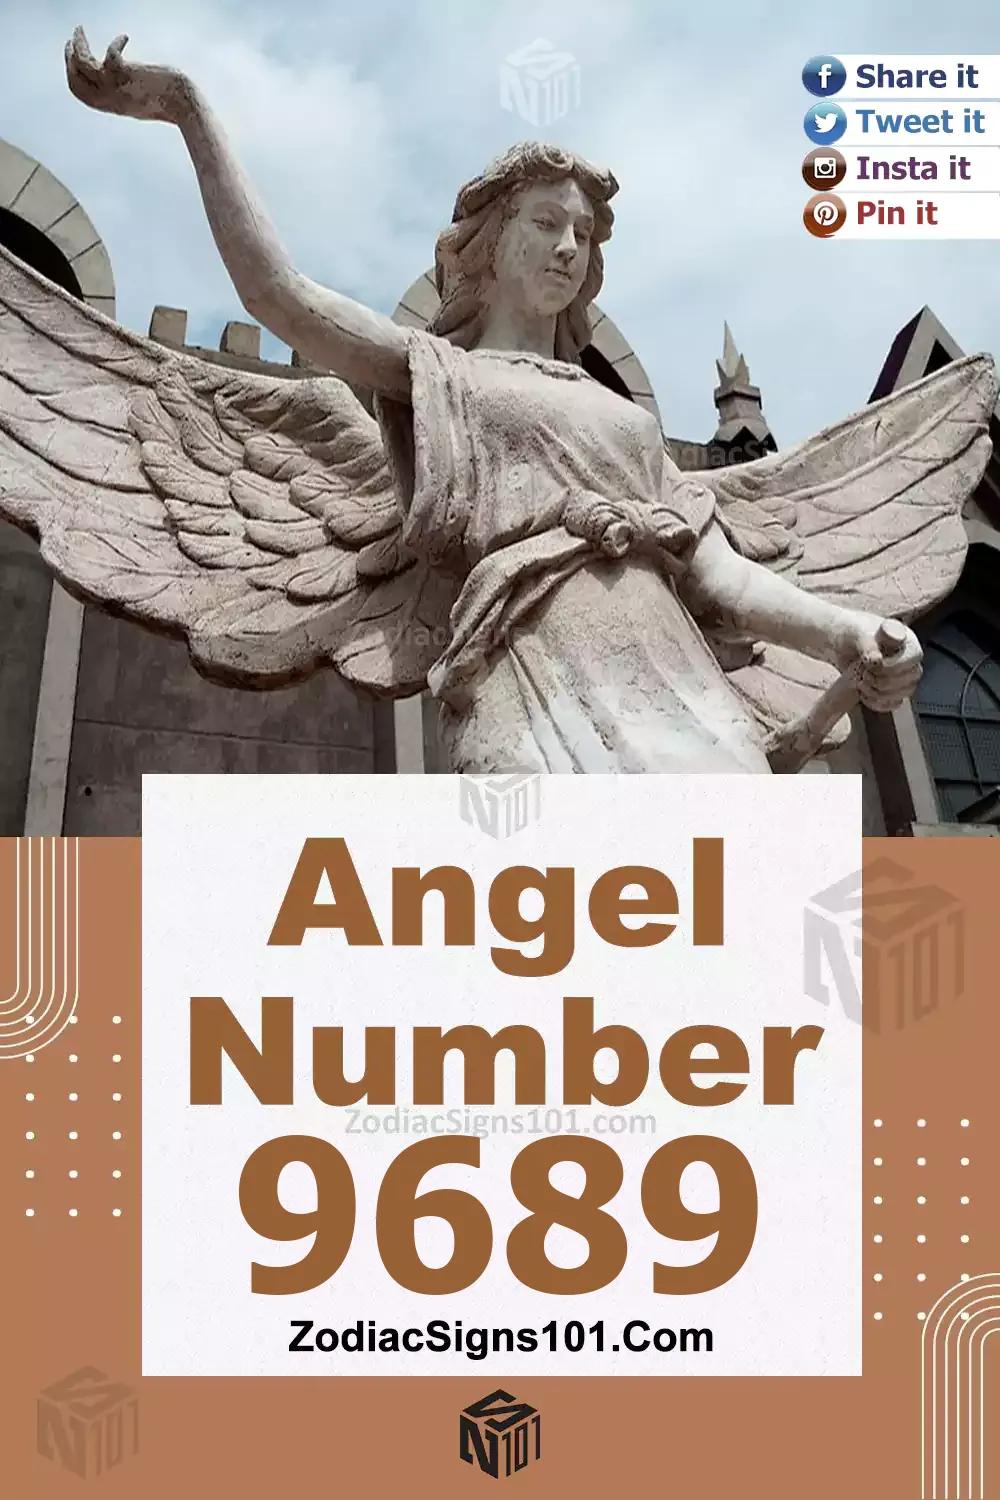 9689 Angel Number Meaning